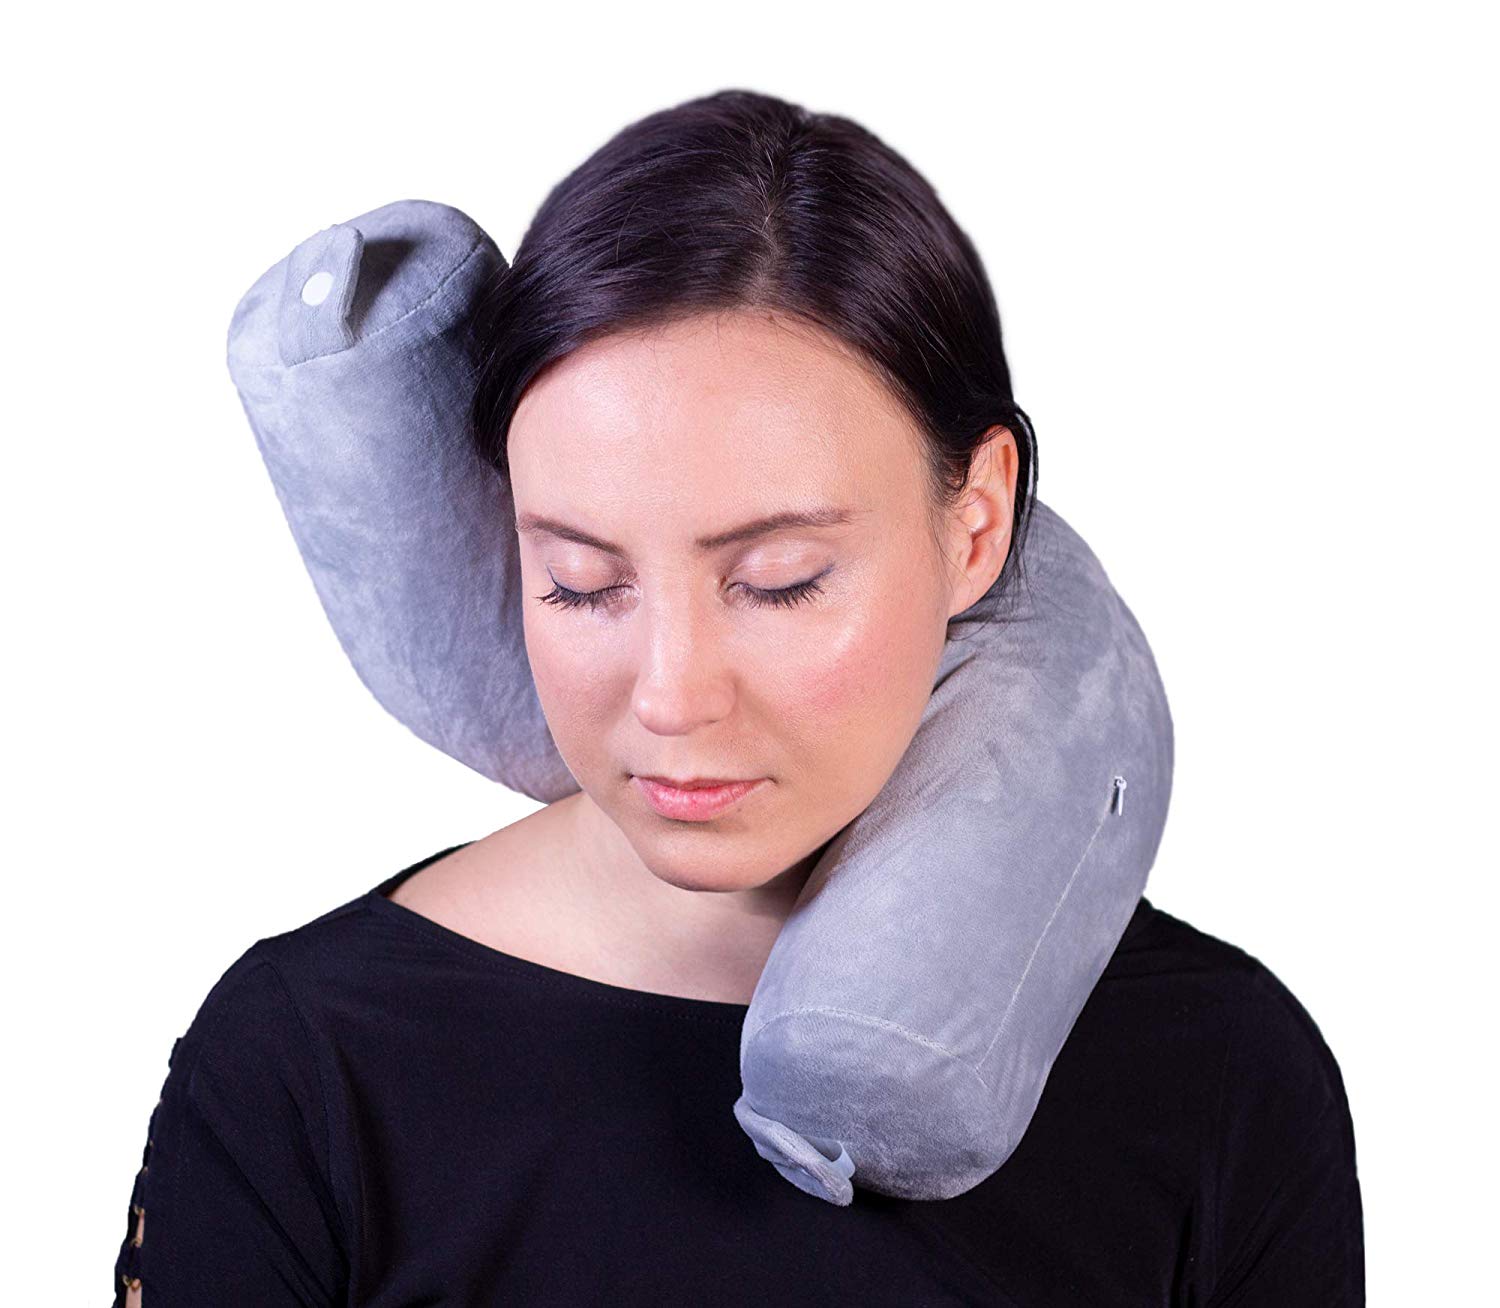 Travel Pillow Memory Foam Twist for Neck, Chin, Back, and Leg Support by Vertall - Comfortable, Lightweight and Adjustable with Machine Washable Cover -Gray - image 1 of 5